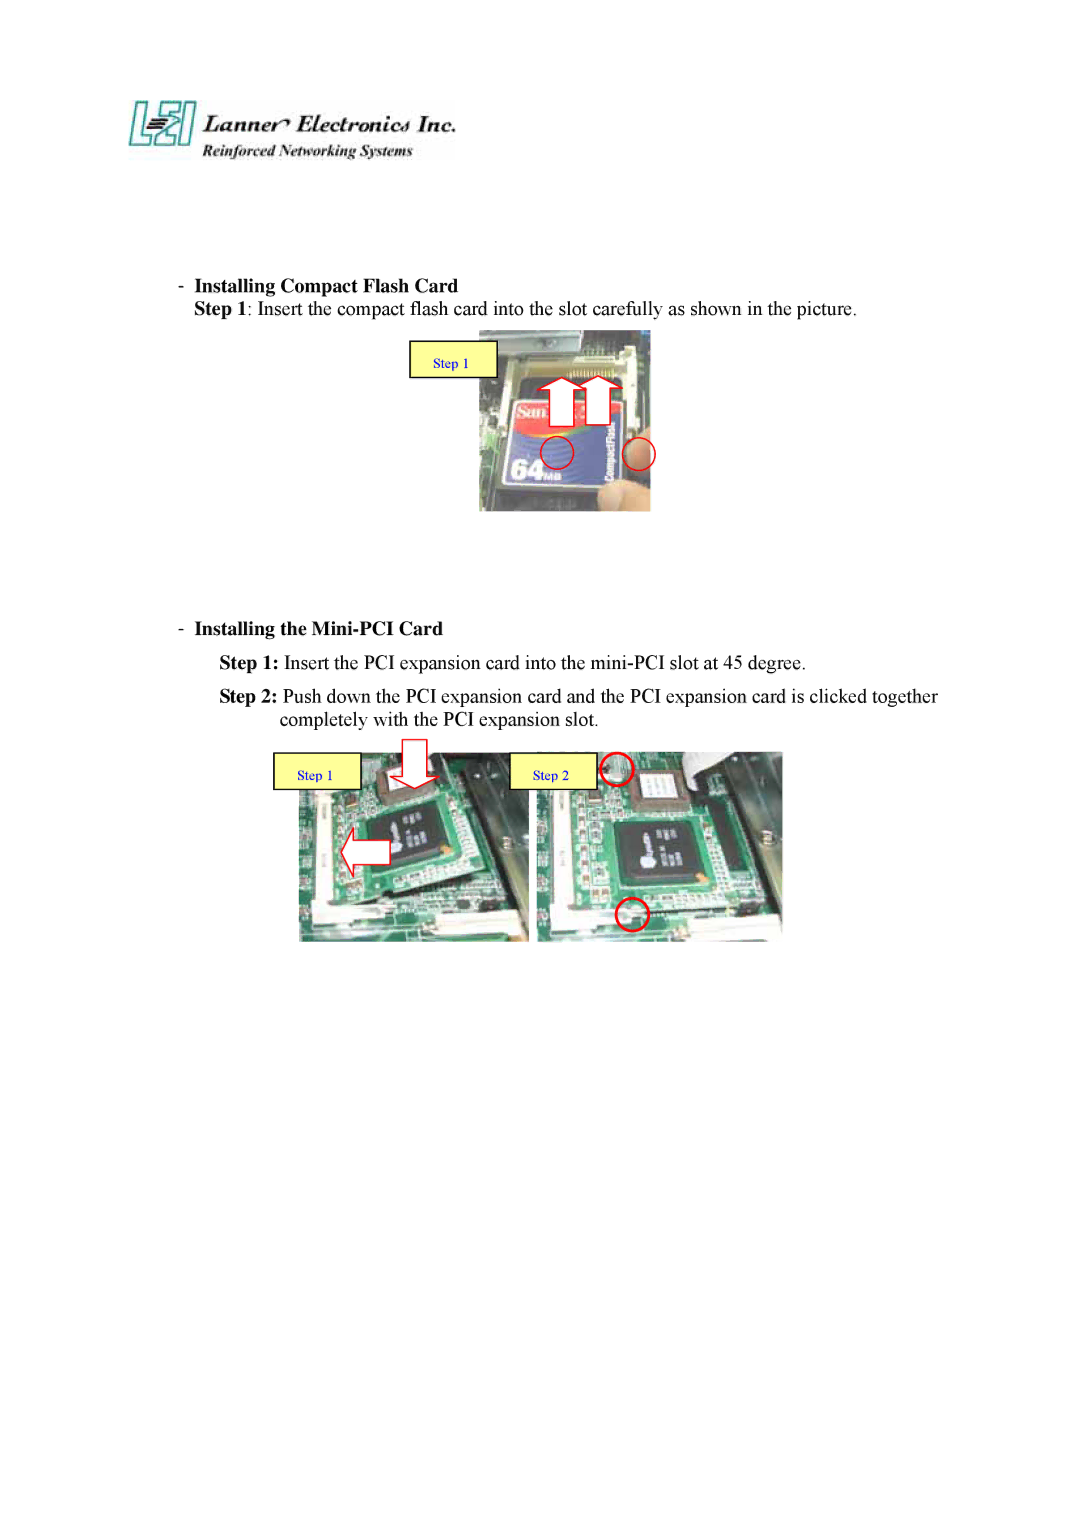 Lanner electronic FW-7890 user manual Installing Compact Flash Card, Installing the Mini-PCI Card 